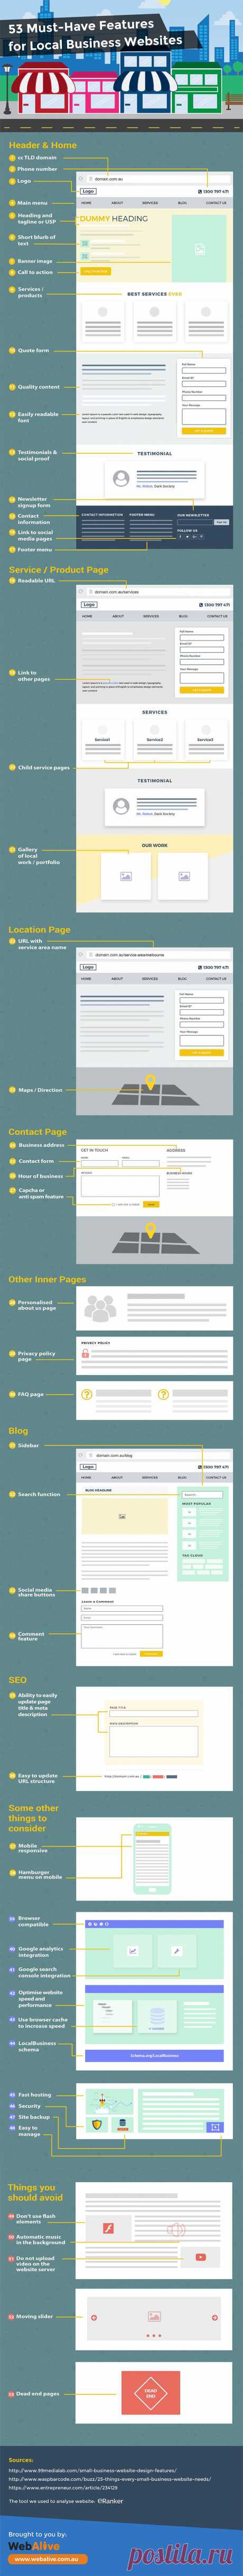 53 Essential Features for an Incredible Business Website - #Infographic
They break things down as follows:
Header and home page
Service / product pages
Location / contact pages
Other inner pages
Blog
SEO / technical
Things to avoid